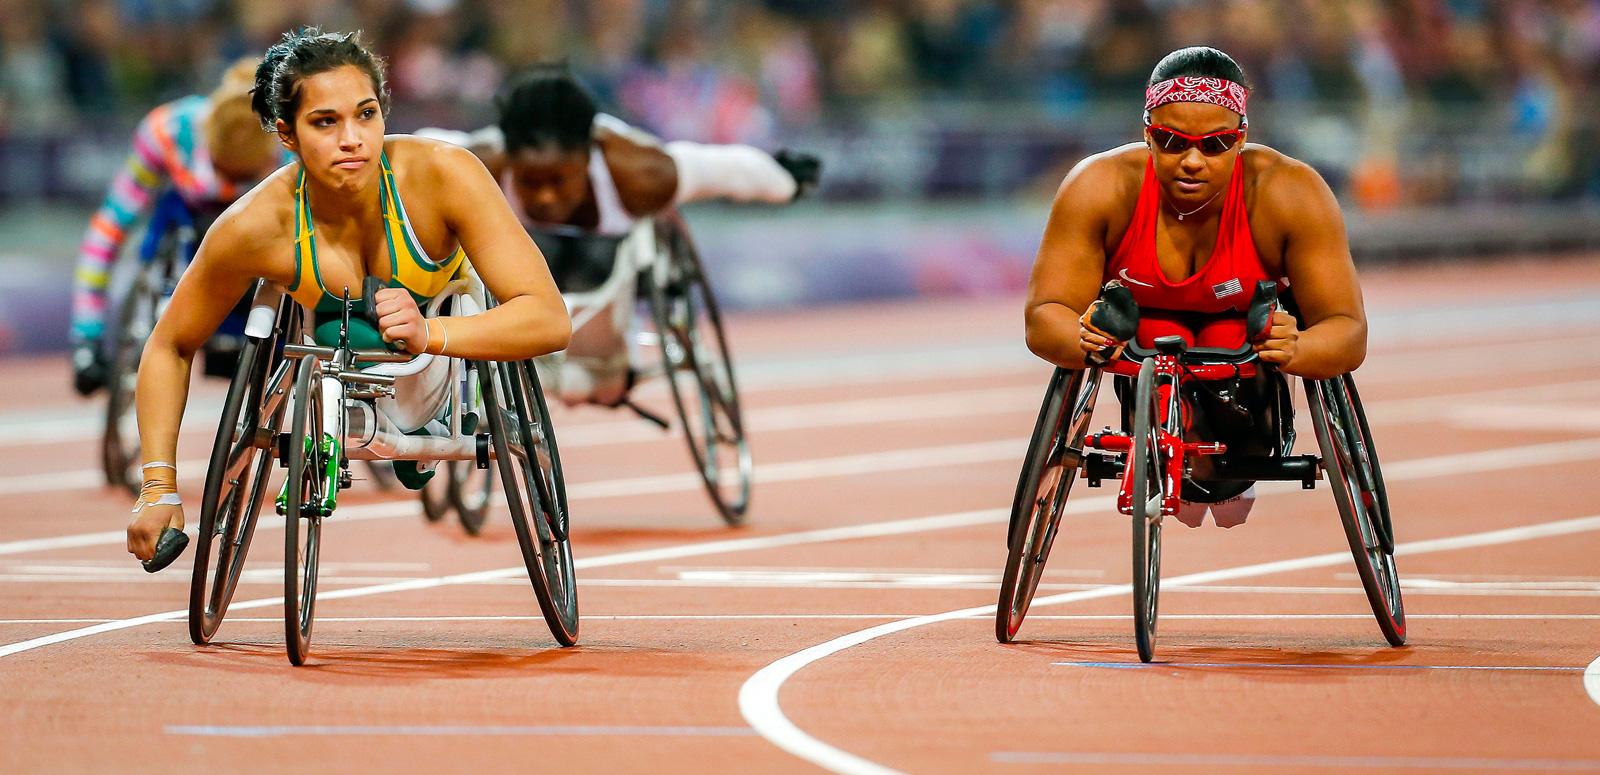 Women wheelchair athletes competing on an Olympic race track. There are two in the foreground who are side by side and another two can be seen further down the track.